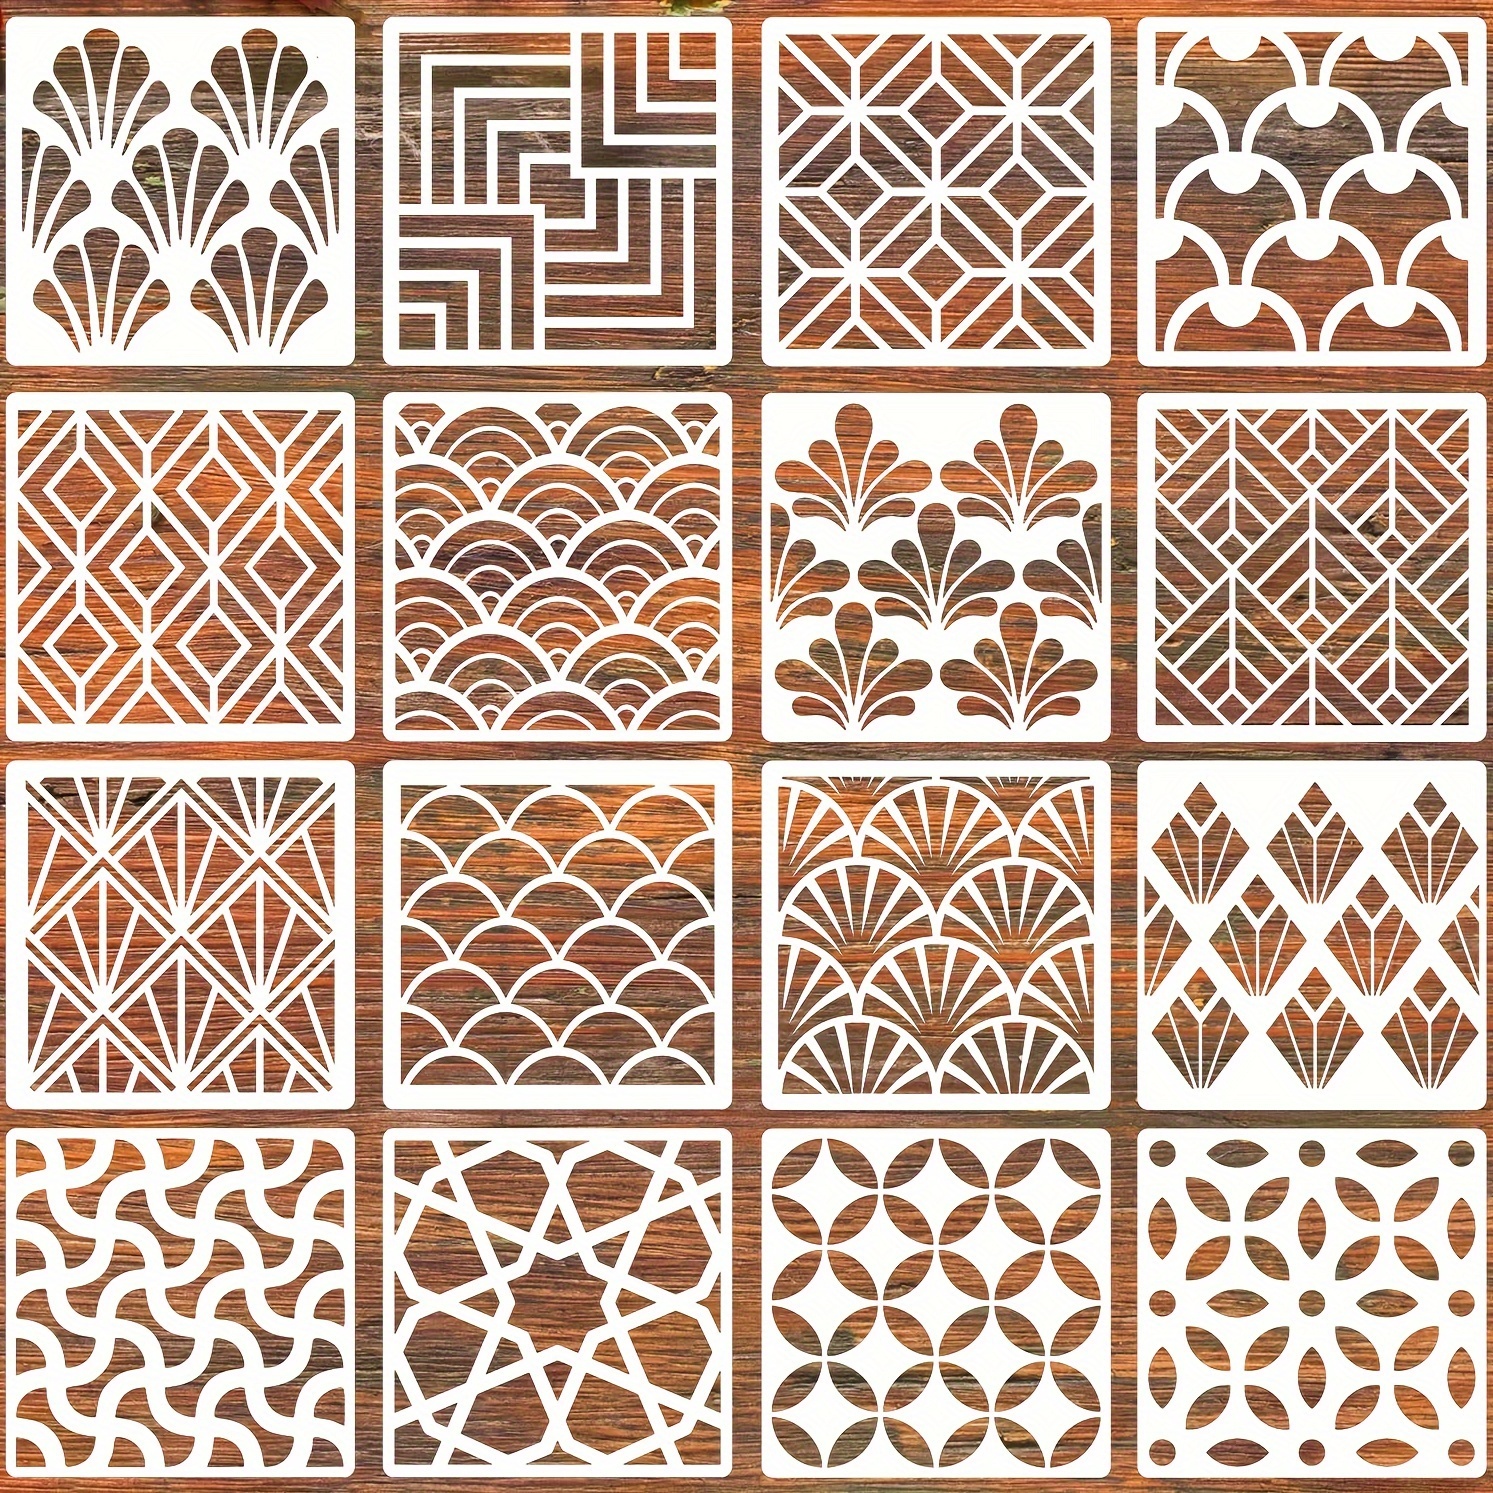 

16pcs Tile Stencil Wall Stencils For Crafts Reusable Geometric Pattern Texture Stencils For Floor Drawing Templates For Furniture Wood Wall Canvas Fabric Painting Art Graffiti